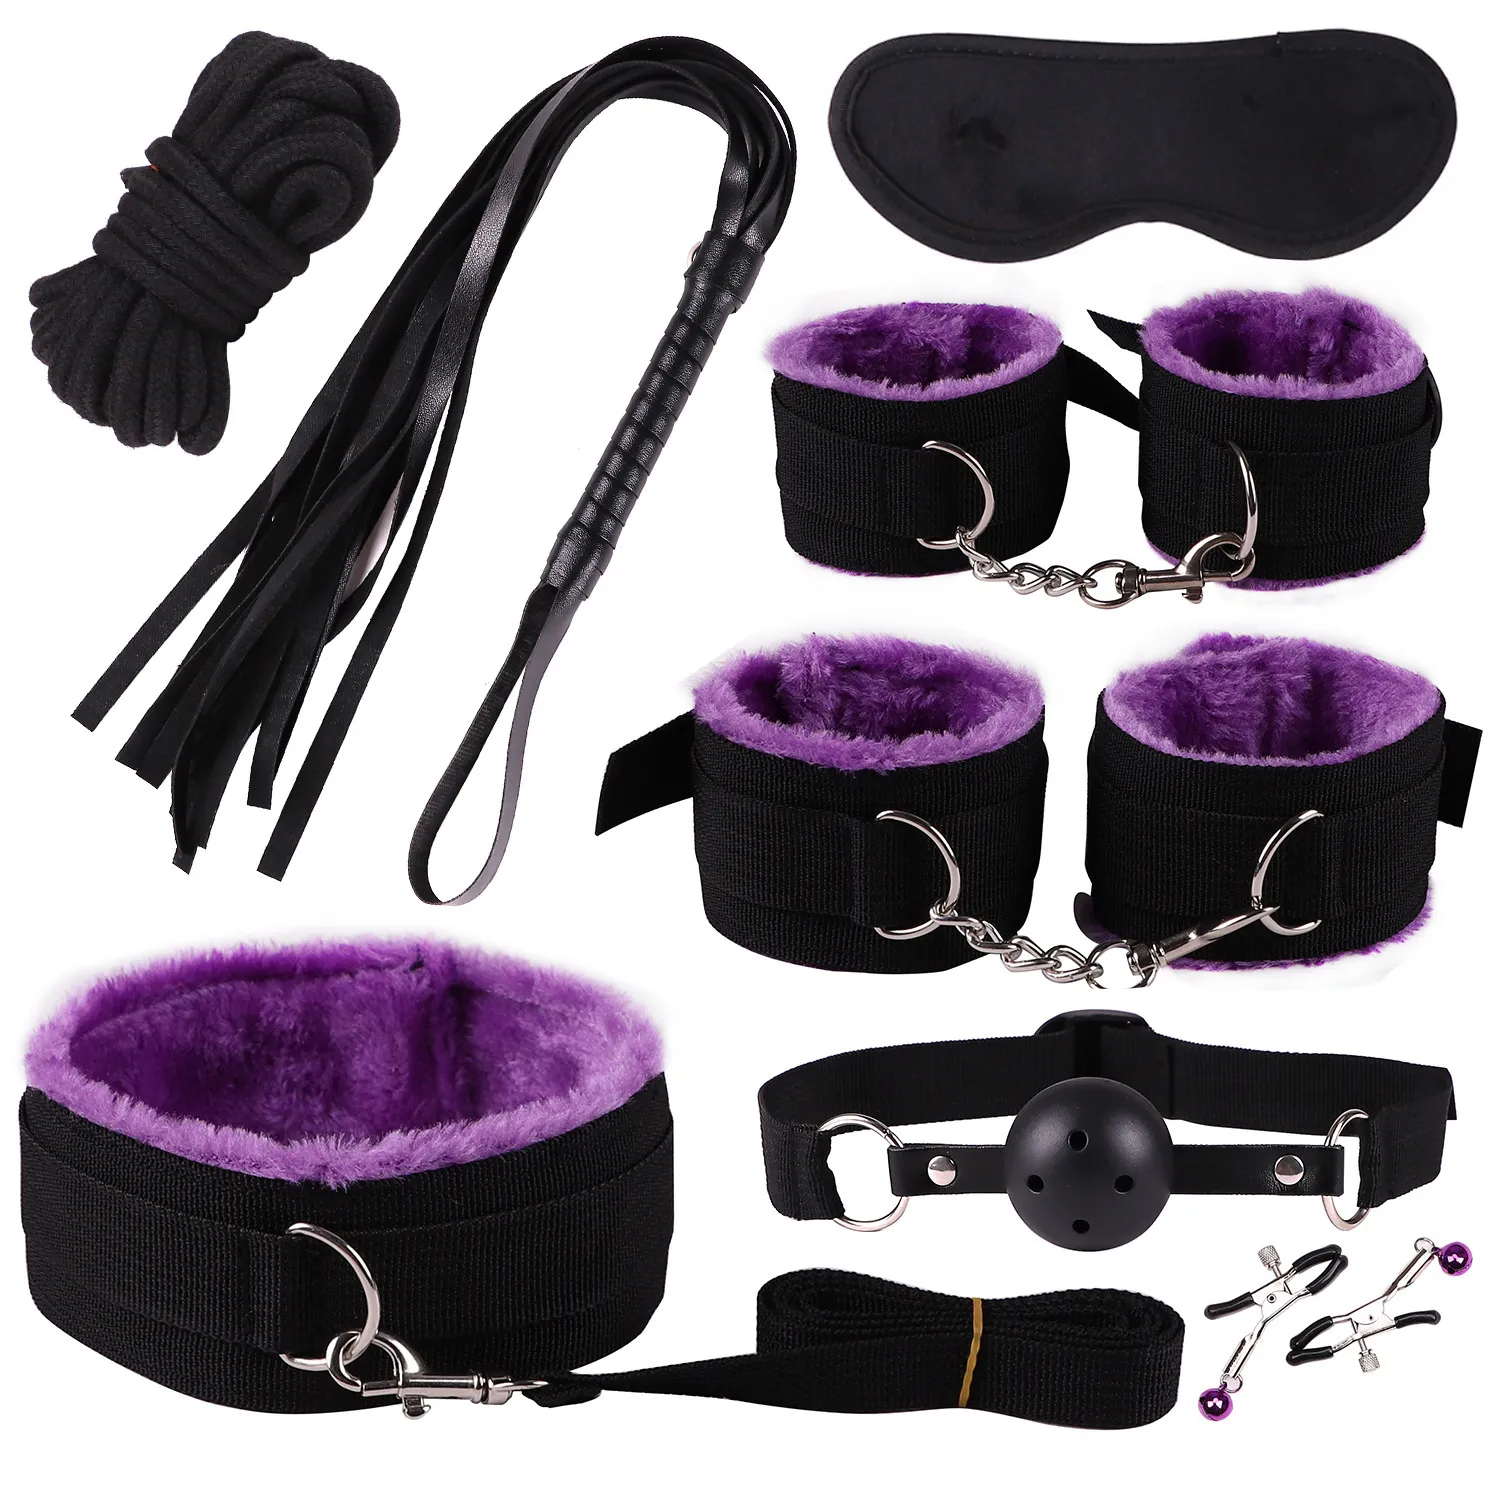 BDSM Bondage Kit Handcuffs Nipple Clamps Mouth Ball Gag Whip Cotton Rope sexy Toys For Couples Eye mask Neck Collar